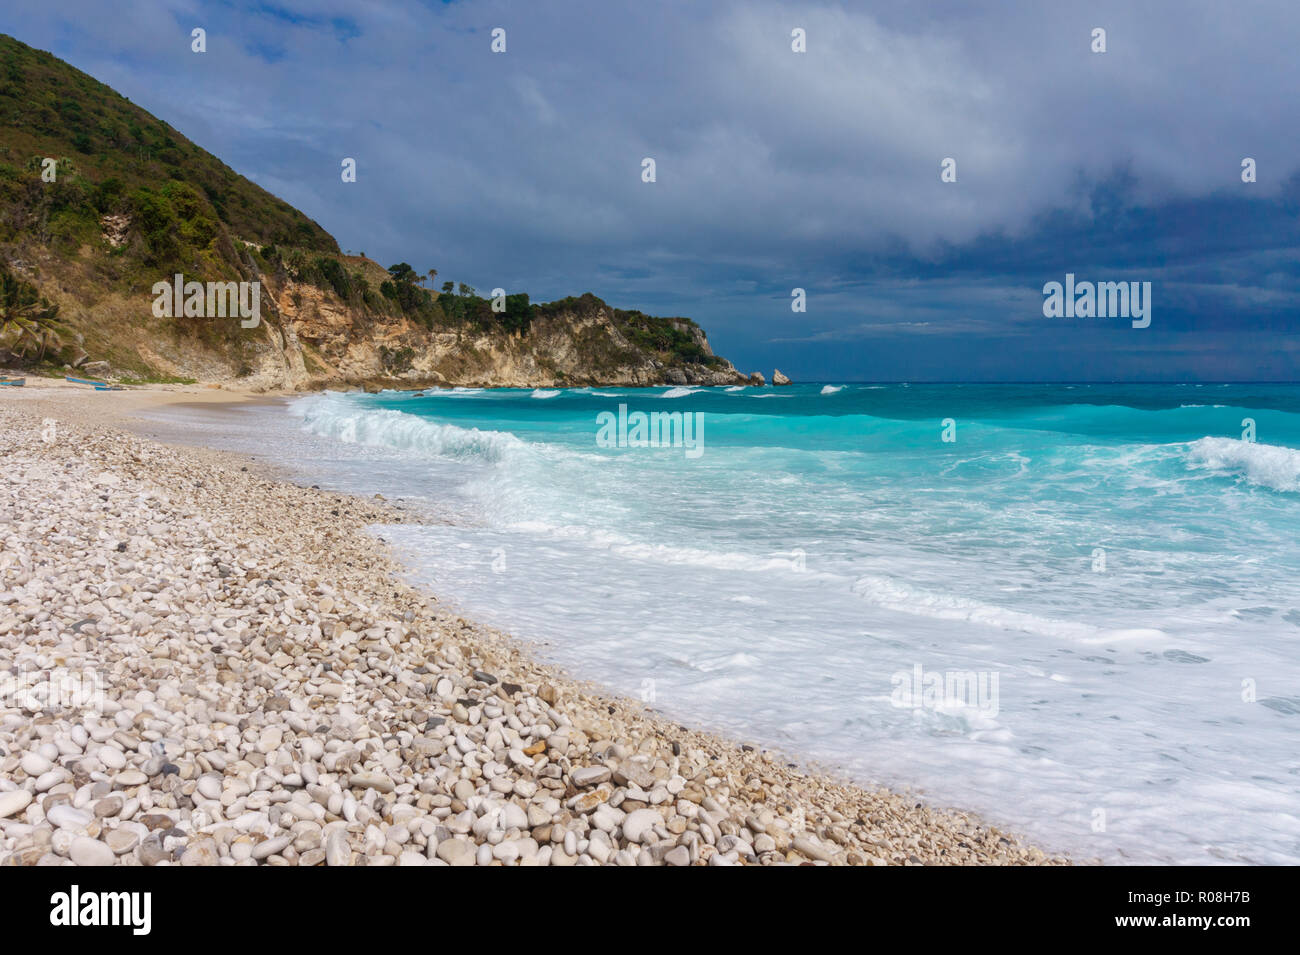 The storm in the Caribbean. Pebble beach, stormy blue sea, green hill and gray sky. Dominican Republic Stock Photo